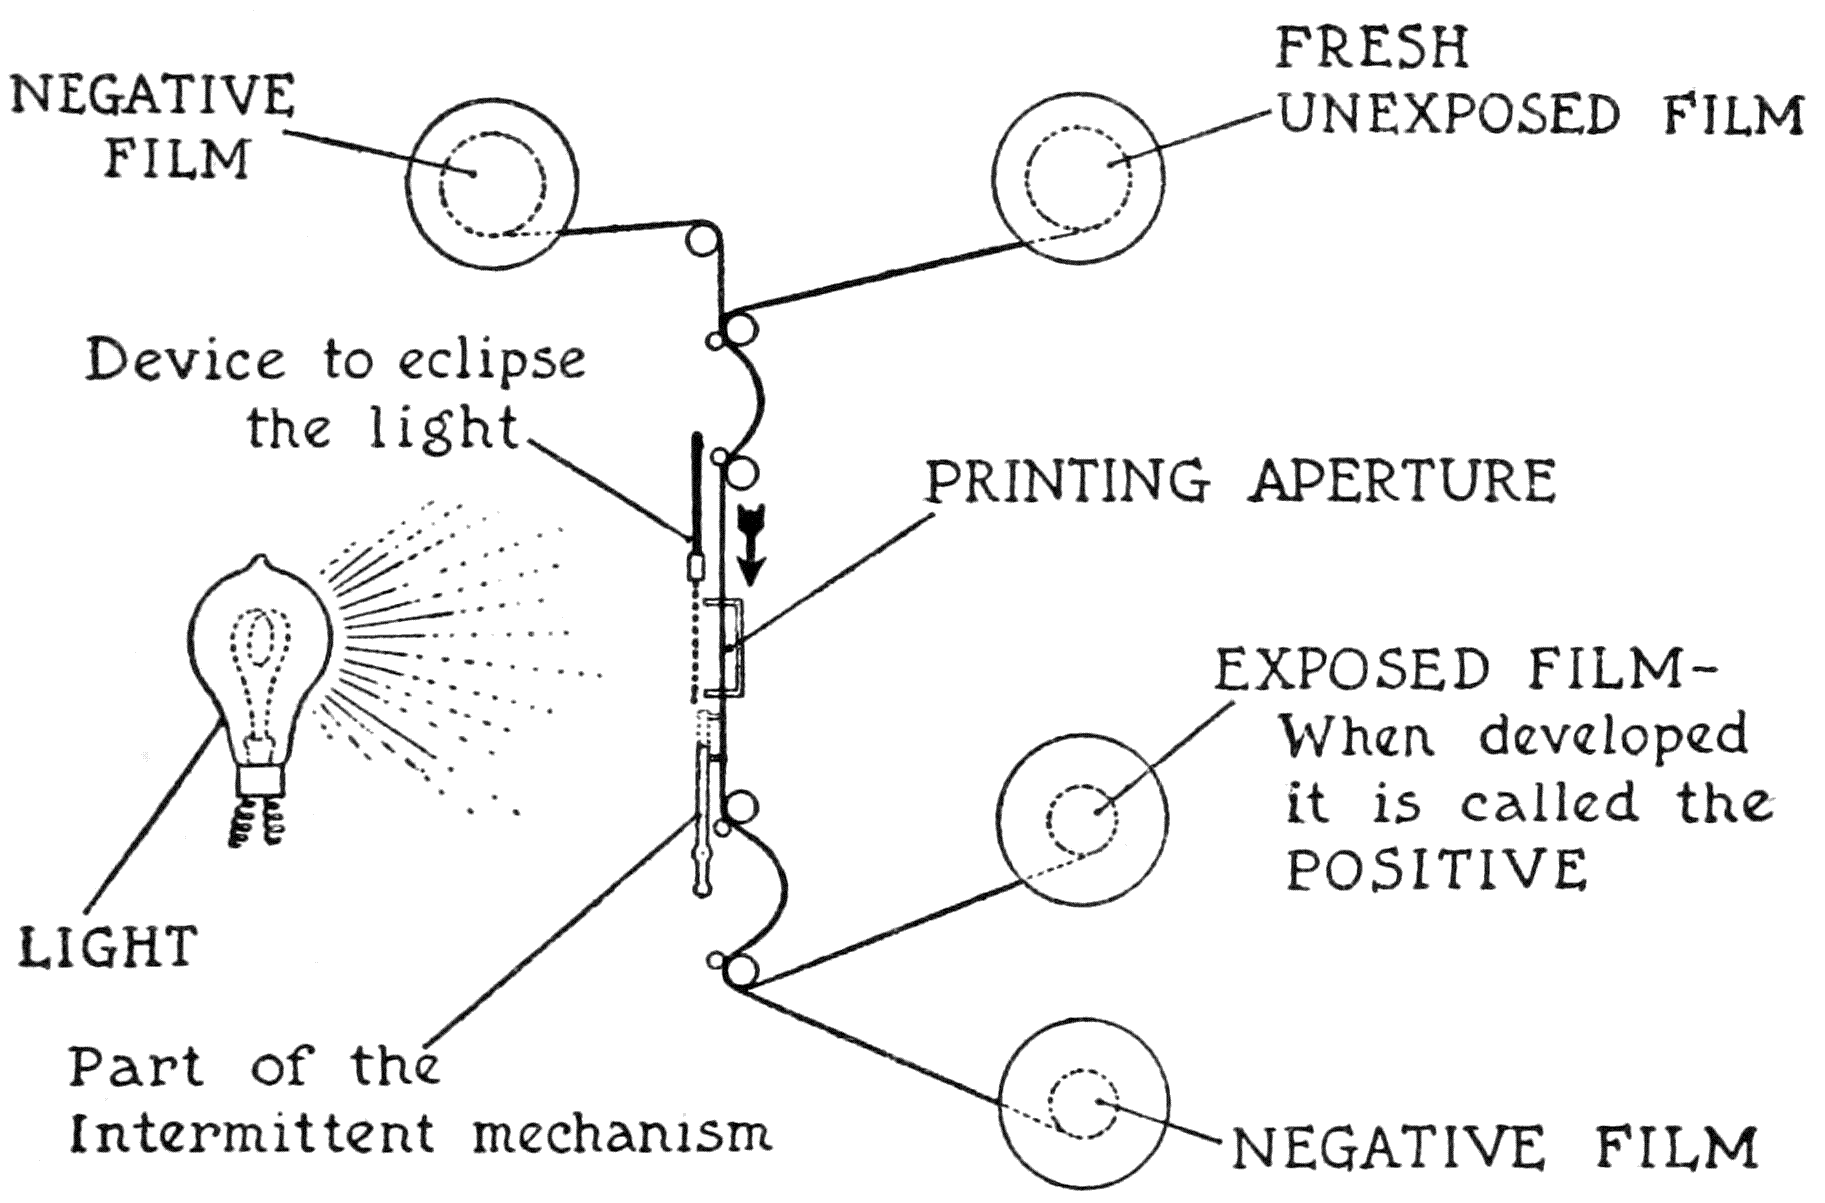 Negative Film; Fresh unexposed film; Device to eclipse the light; Light; Printing aperature; Part of the intermittent mechanism; Exposed film-when developed it is called the Postitive; Negative Film